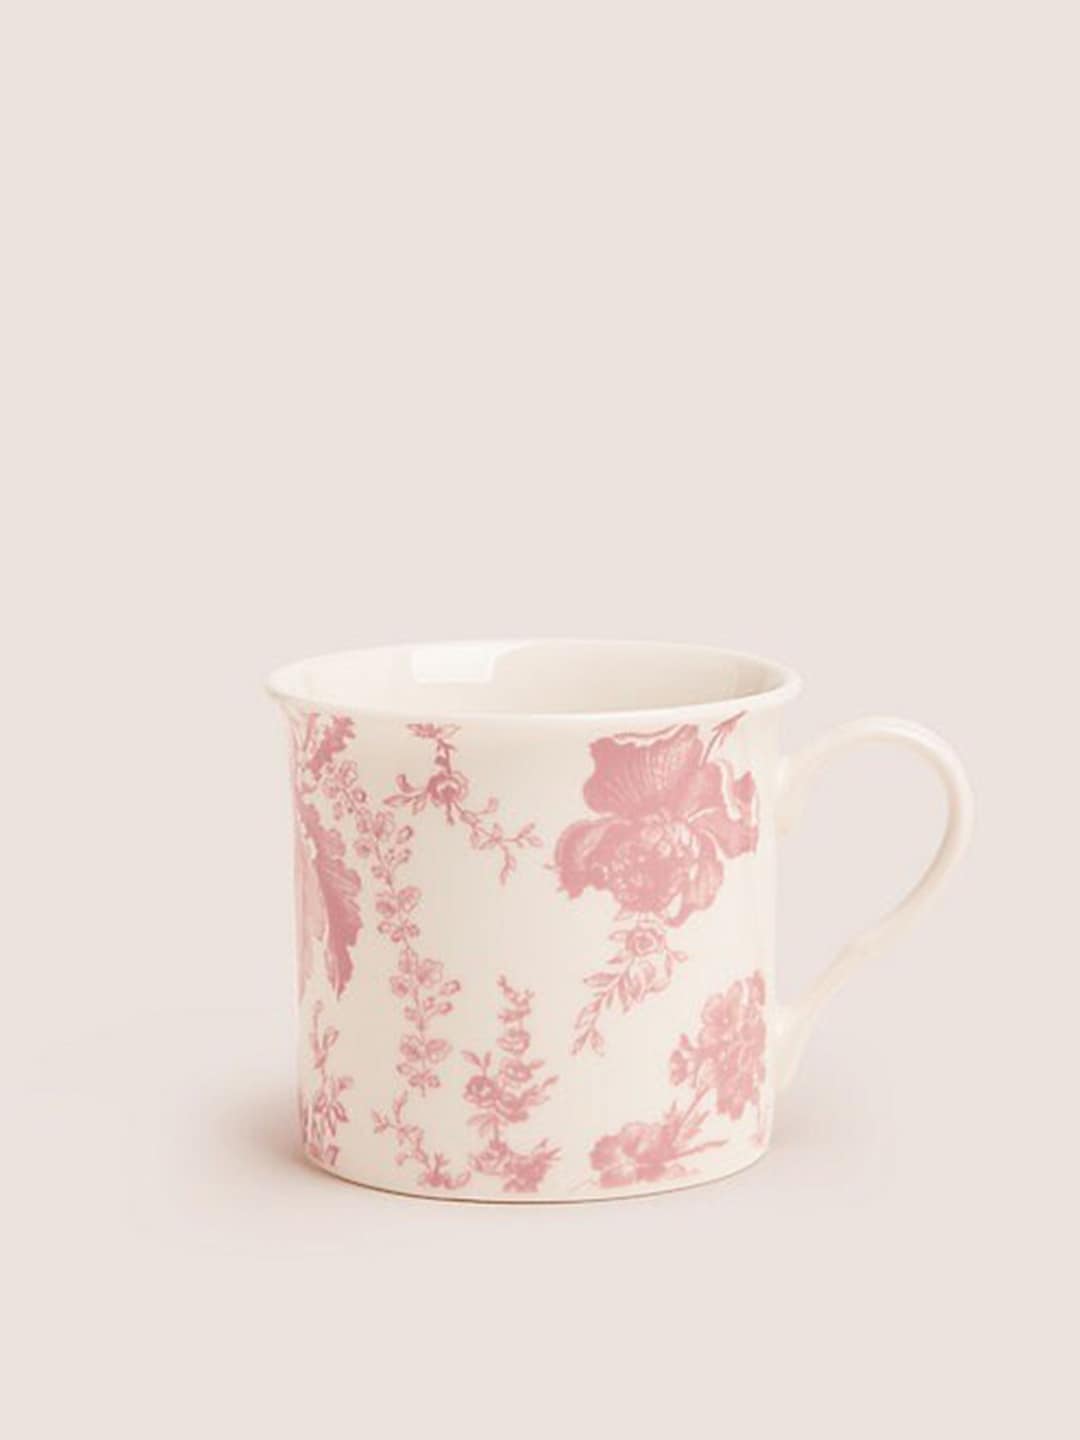 Marks & Spencer Pink & Cream-Coloured Printed Bone China Glossy Mugs Set of Cups and Mugs Price in India